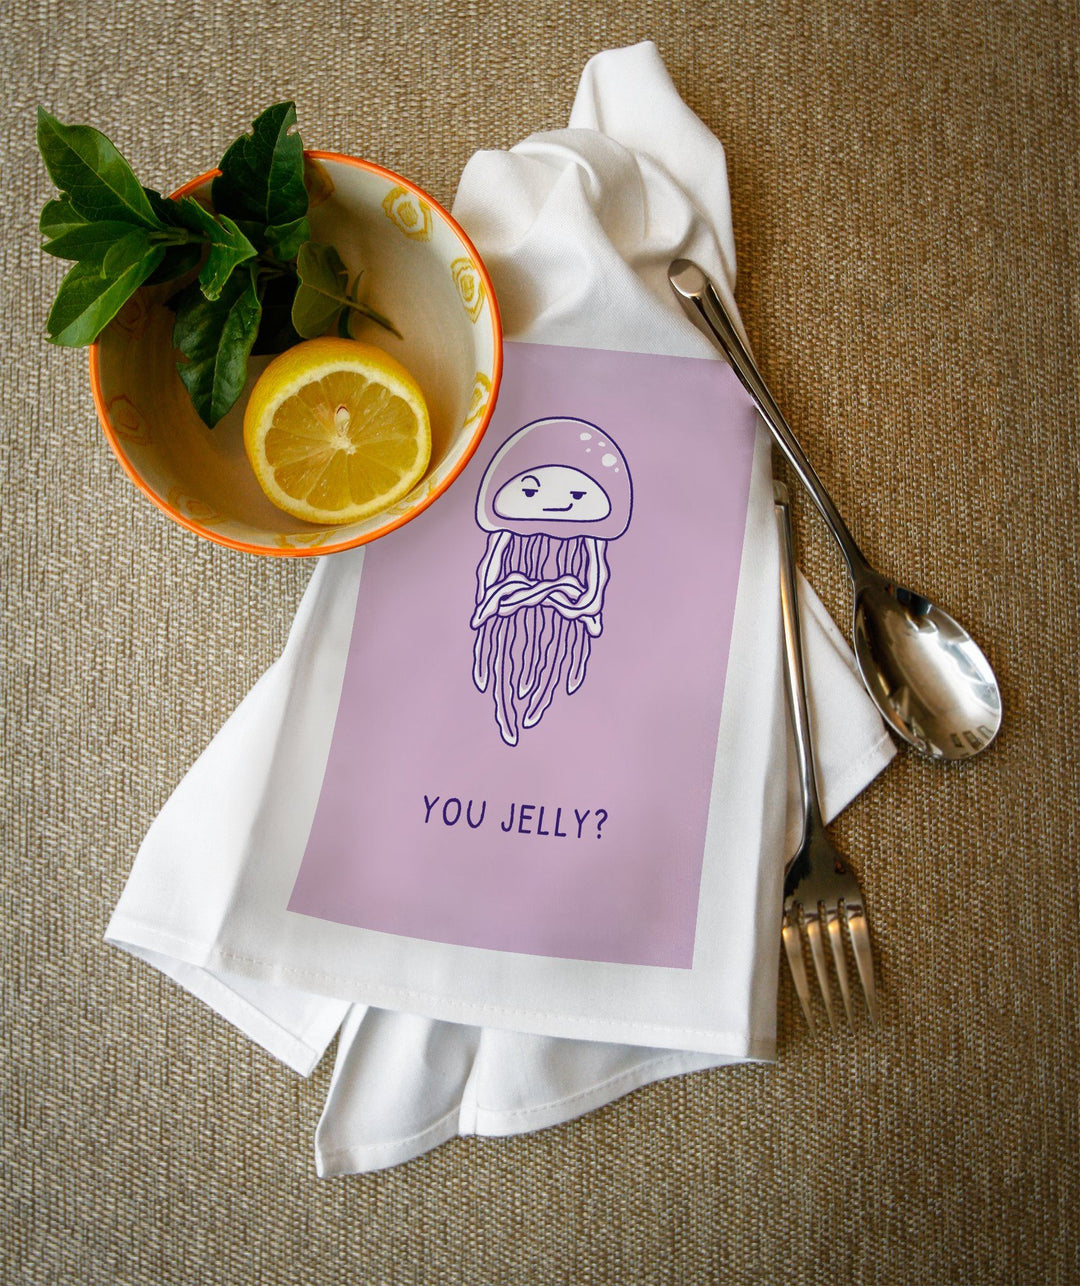 Humorous Animals Collection, Jellyfish, You Jelly, Towels and Aprons Kitchen Lantern Press 